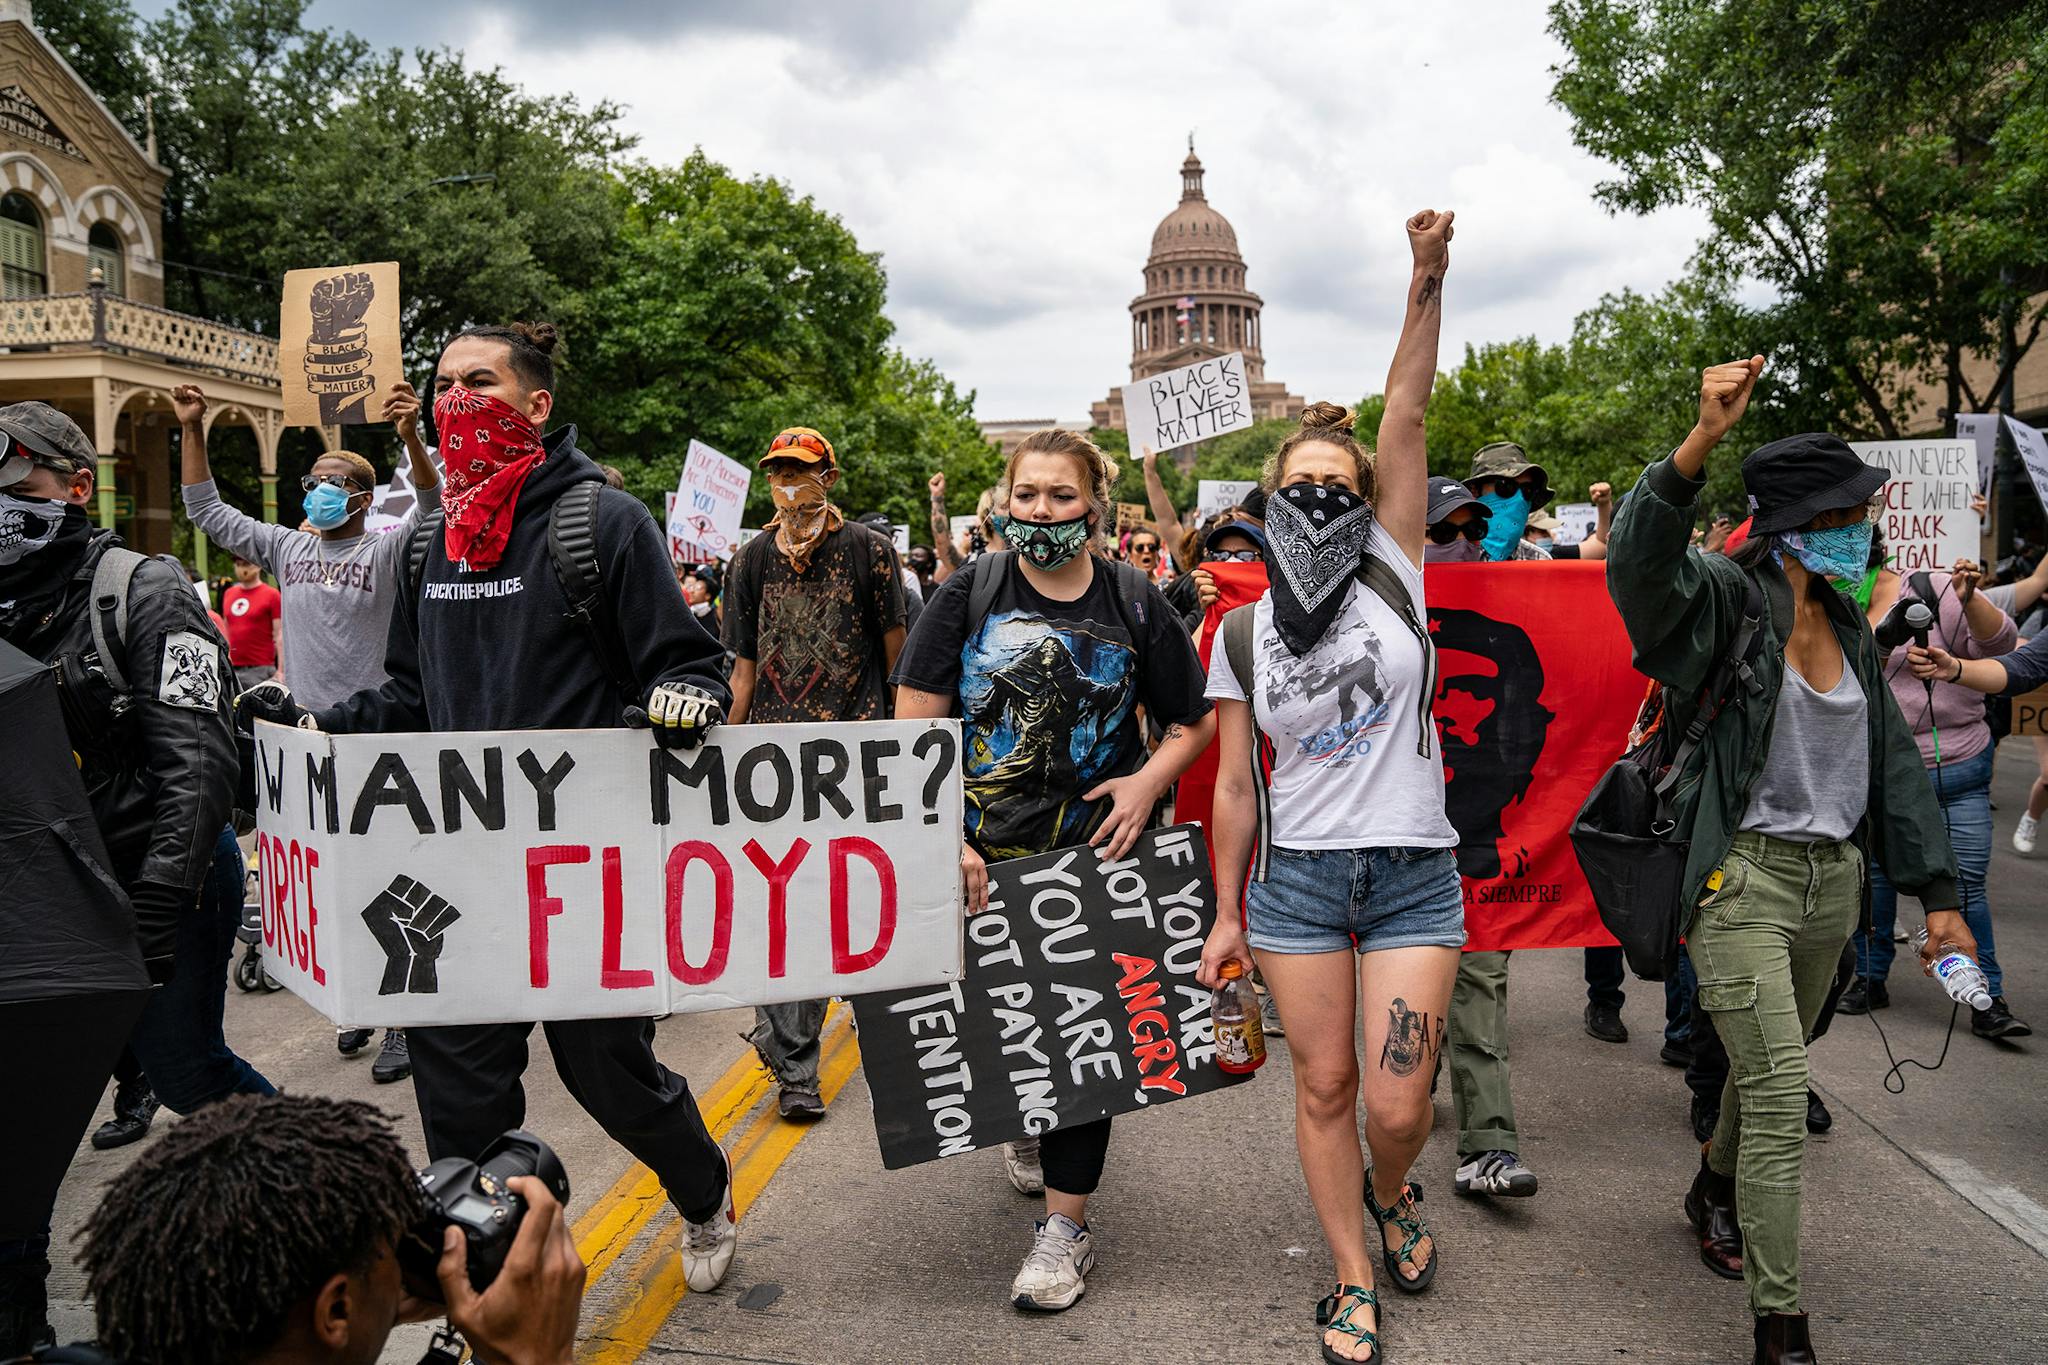 Protesters march on Congress Avenue in Austin on May 31, 2020, after the killing of George Floyd, an unarmed black man in Minnesota, sparks nationwide outrage.